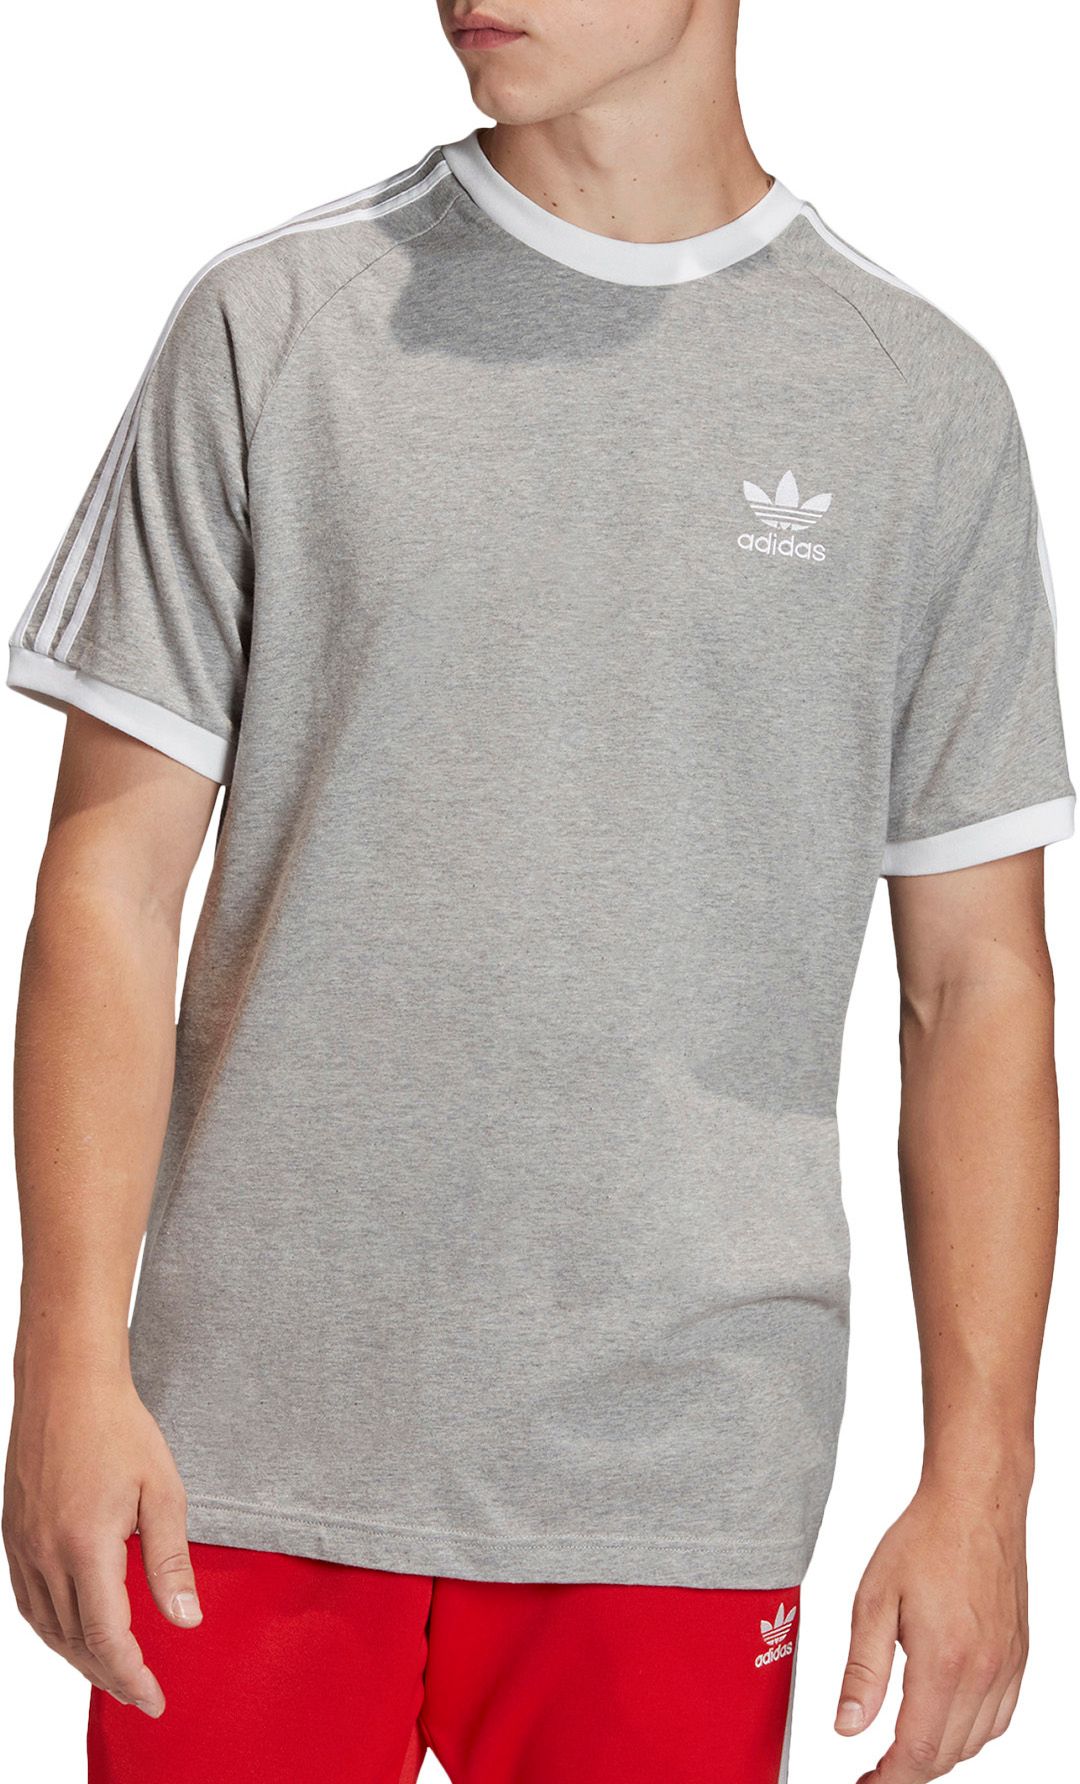 adidas 3 stripe shirt mens fast shipping and best service